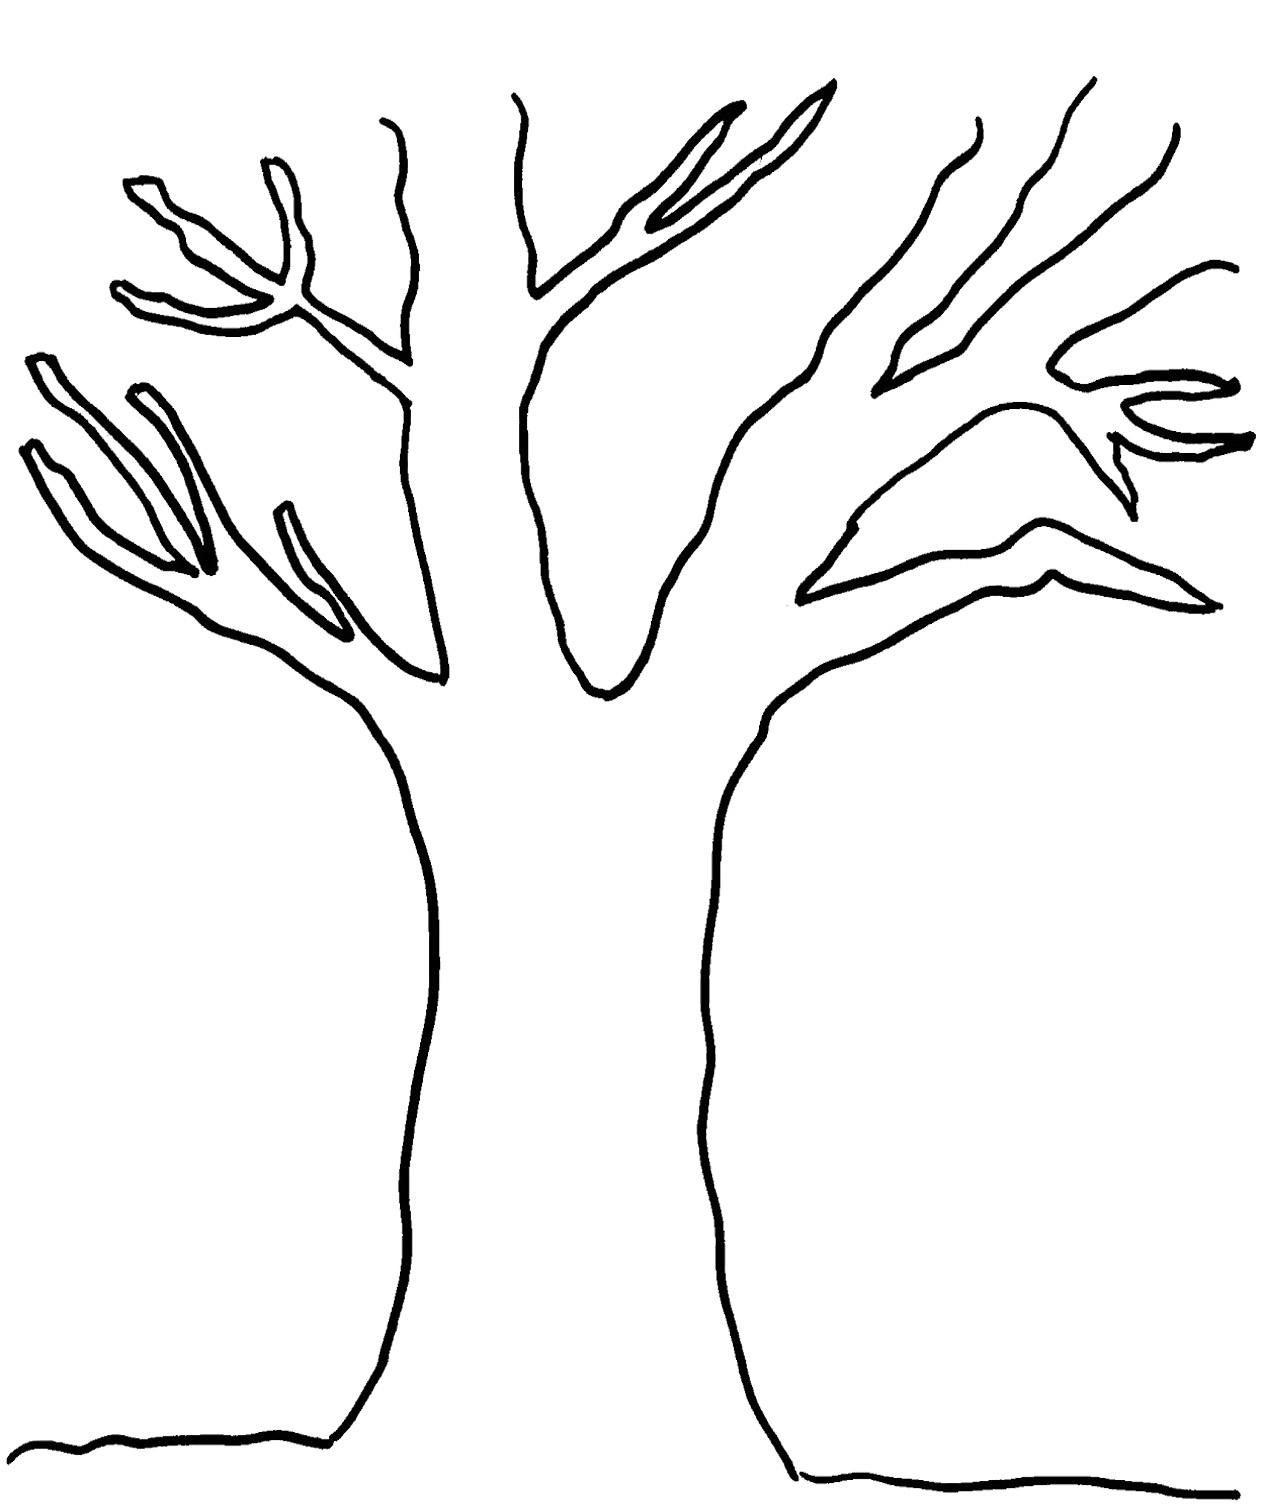 Tree No Leaves - ClipArt Best